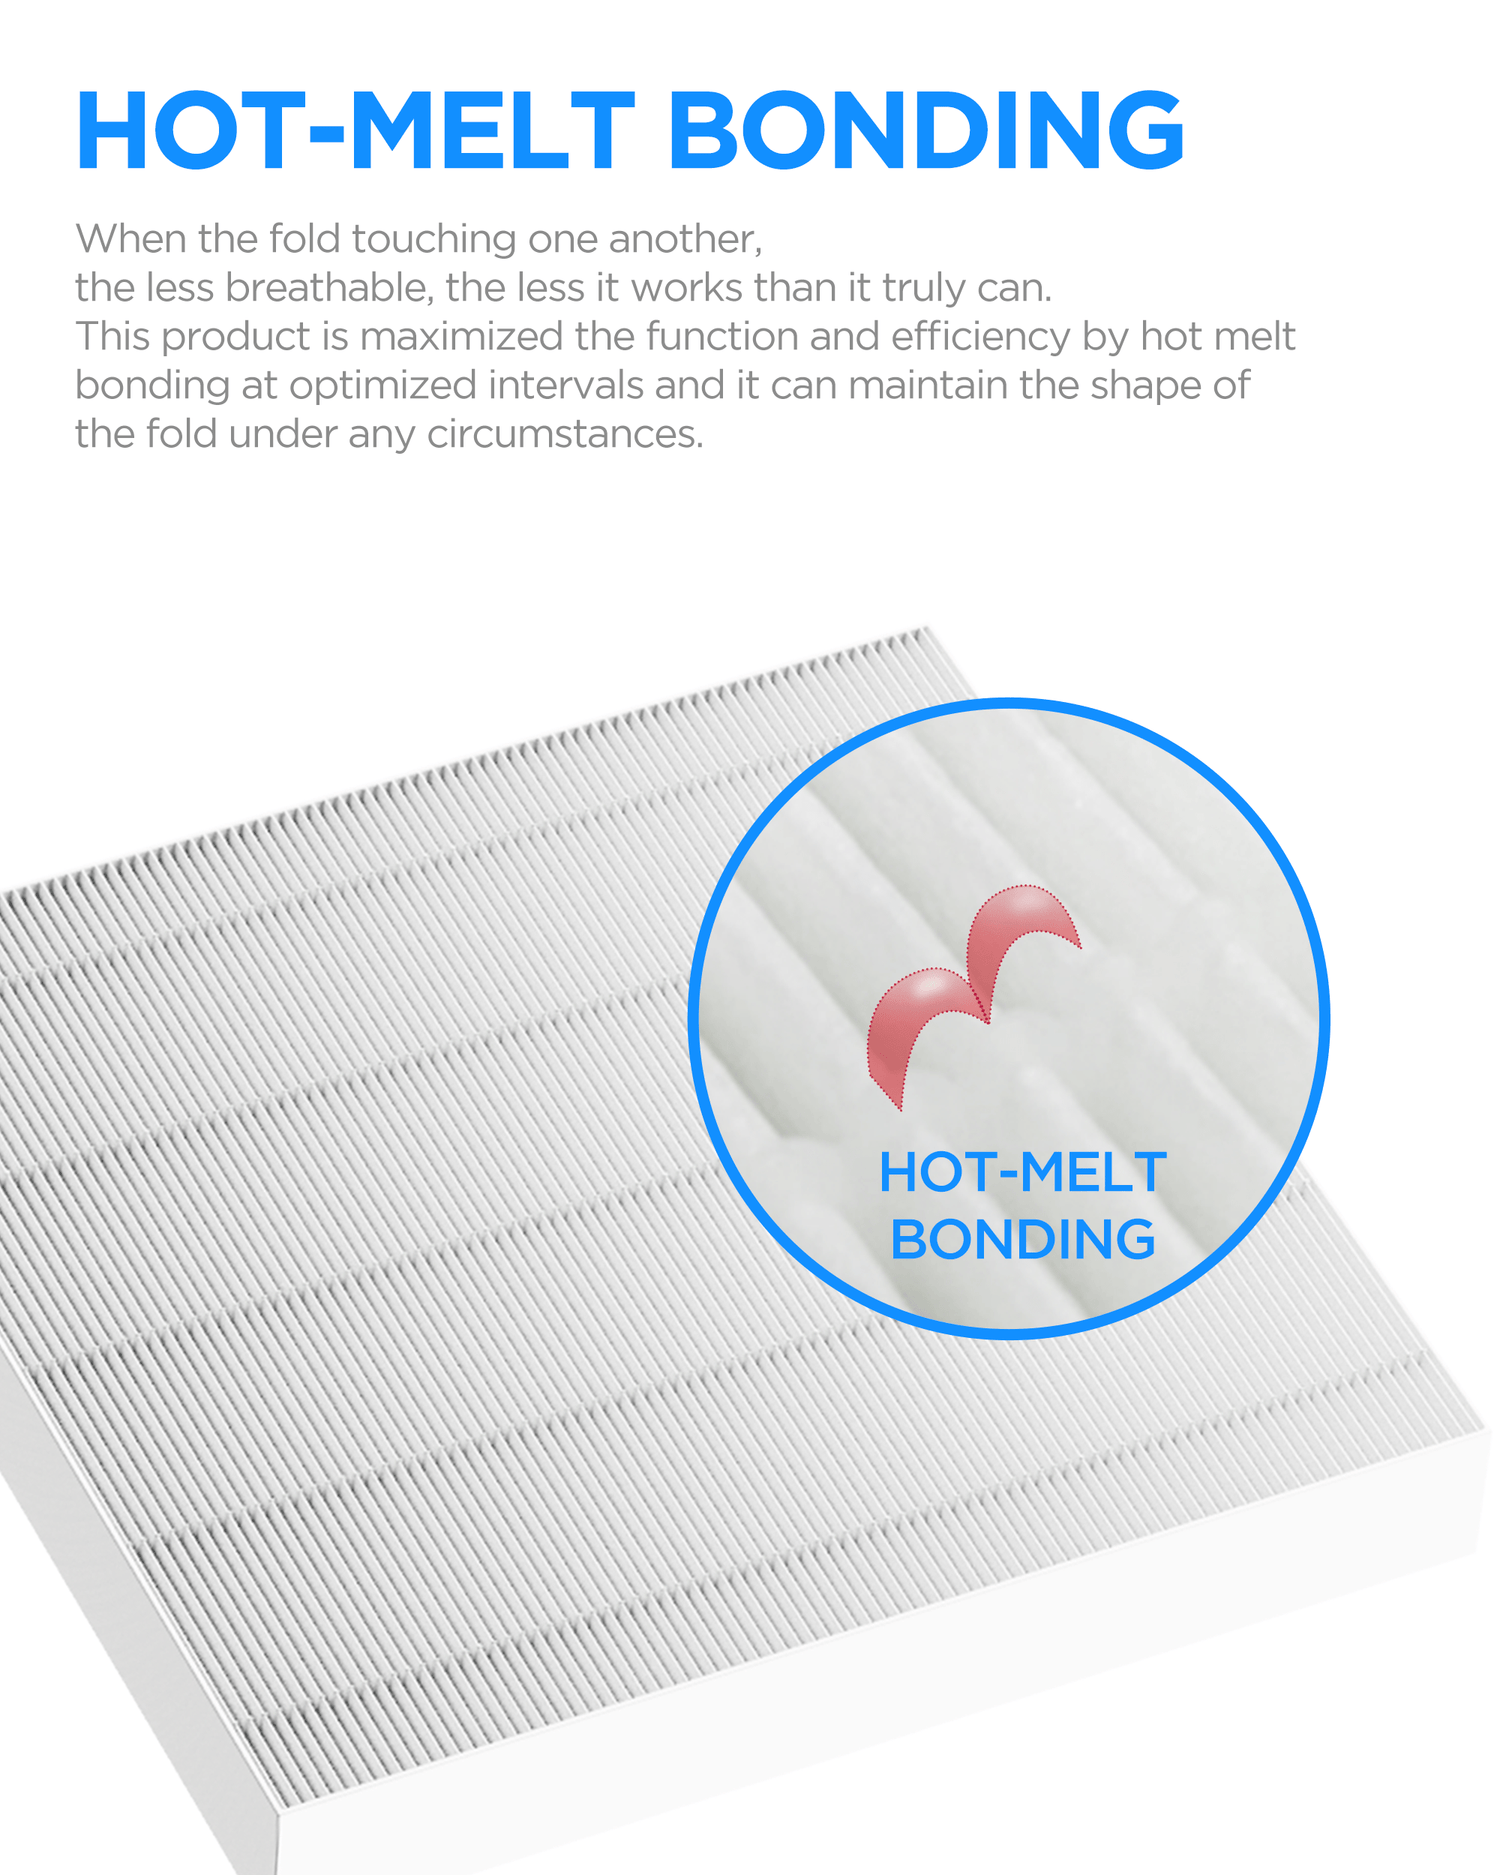 HOT-MELT BONDING / When the fold touching one another, the less breathable, the less it works than it truly can. this product is maximized the function and efficiency by hot melt bonding at optimized  intervals and i can maintain the shape of the fold under any circumstances.